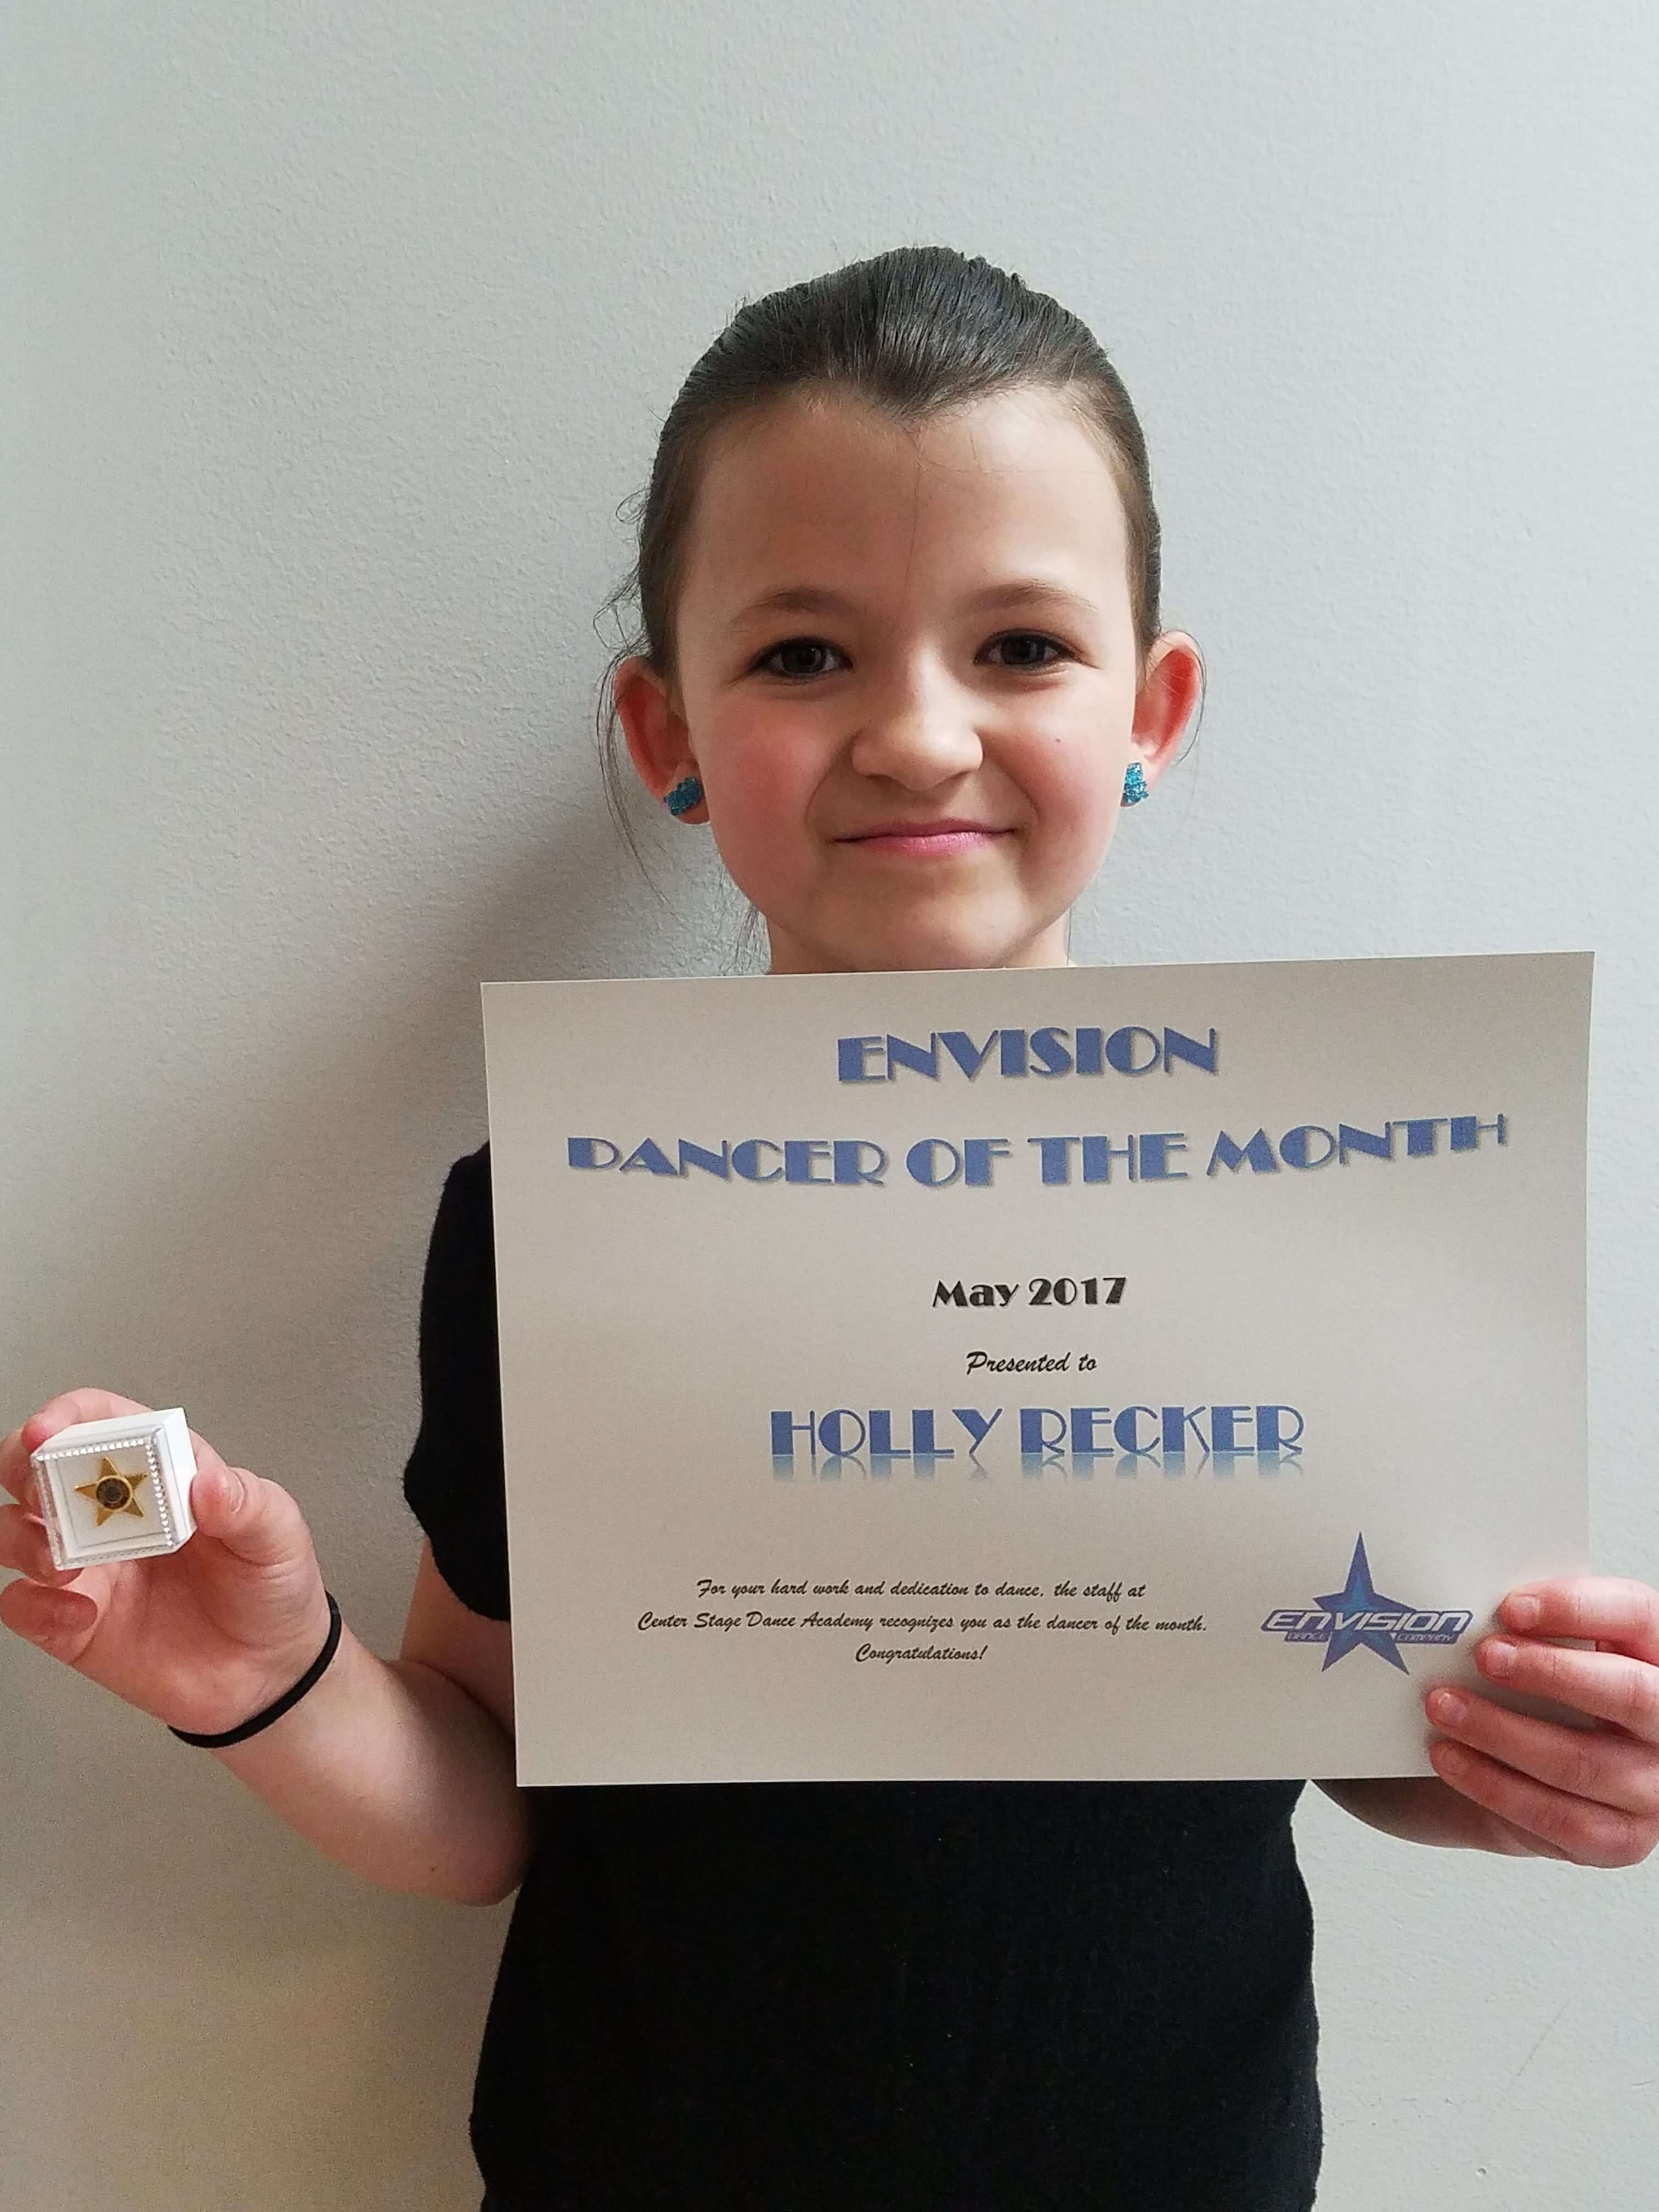 May 2017 Envision Dancer of the Month!